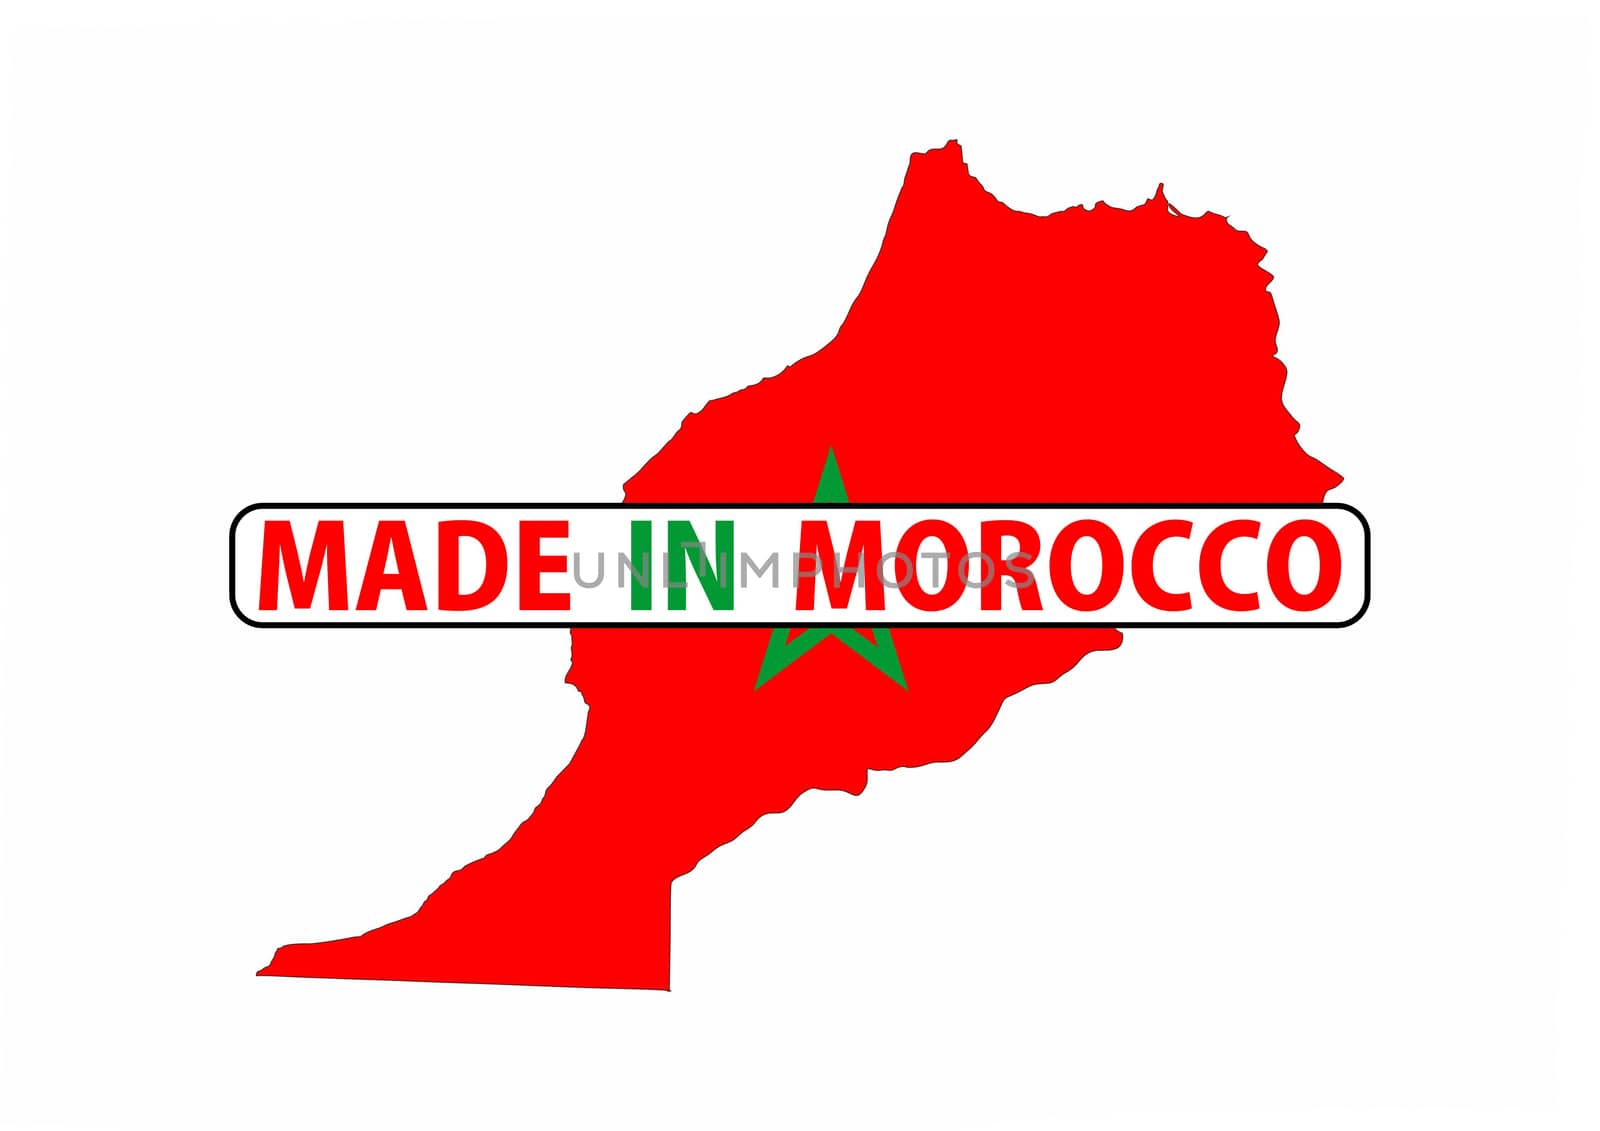 made in morocco country national flag map shape with text